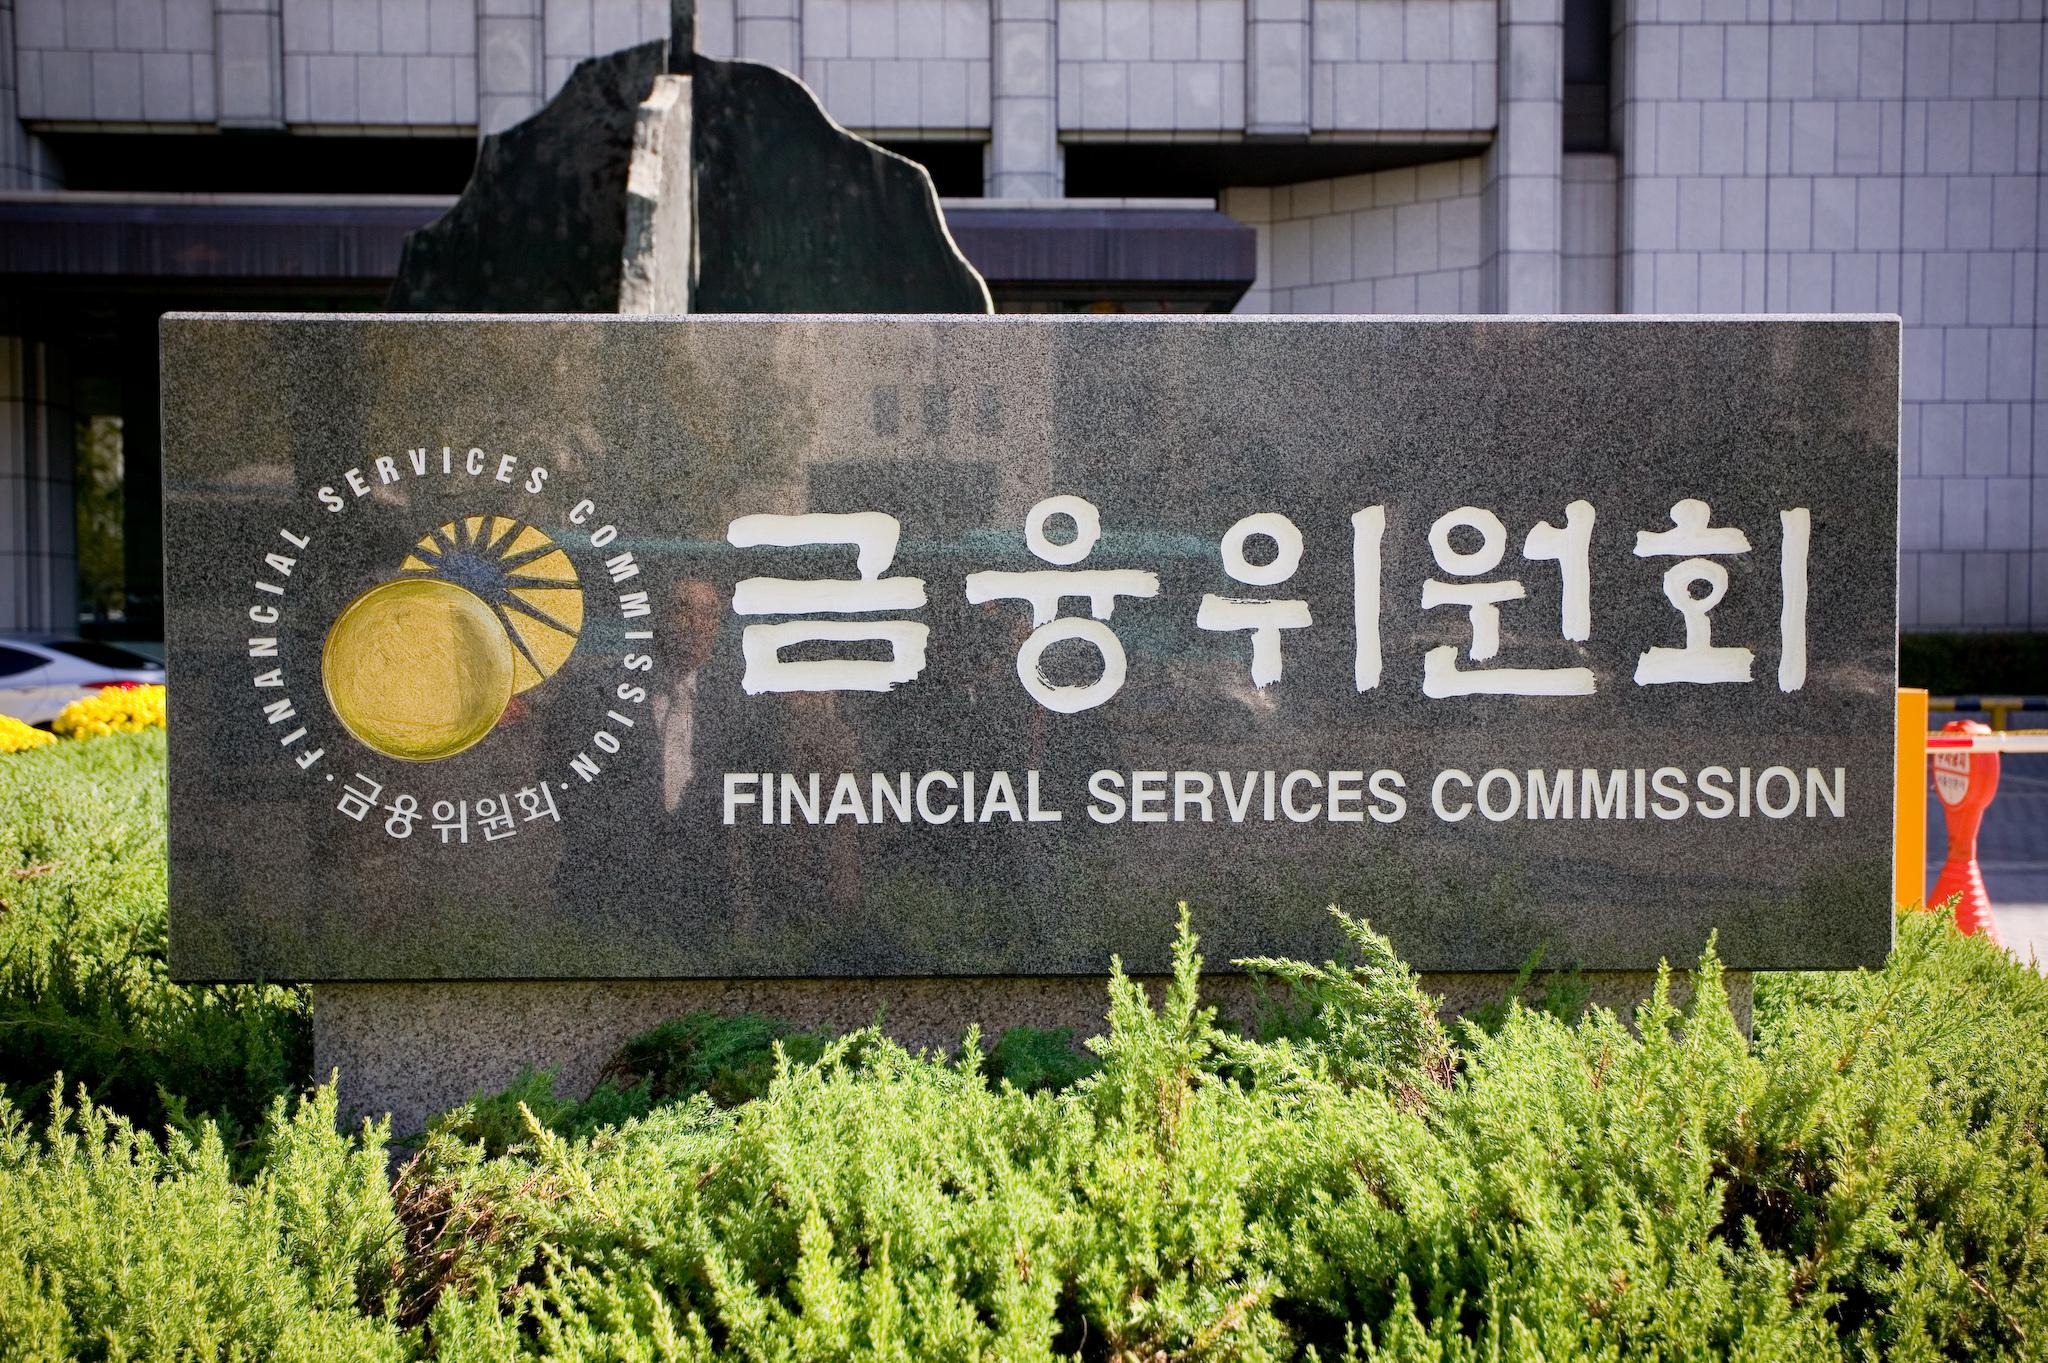 south-korea-moved-to-shut-down-11-local-crypto-exchanges-over-their-involvement-in-illicit-ac...jpeg